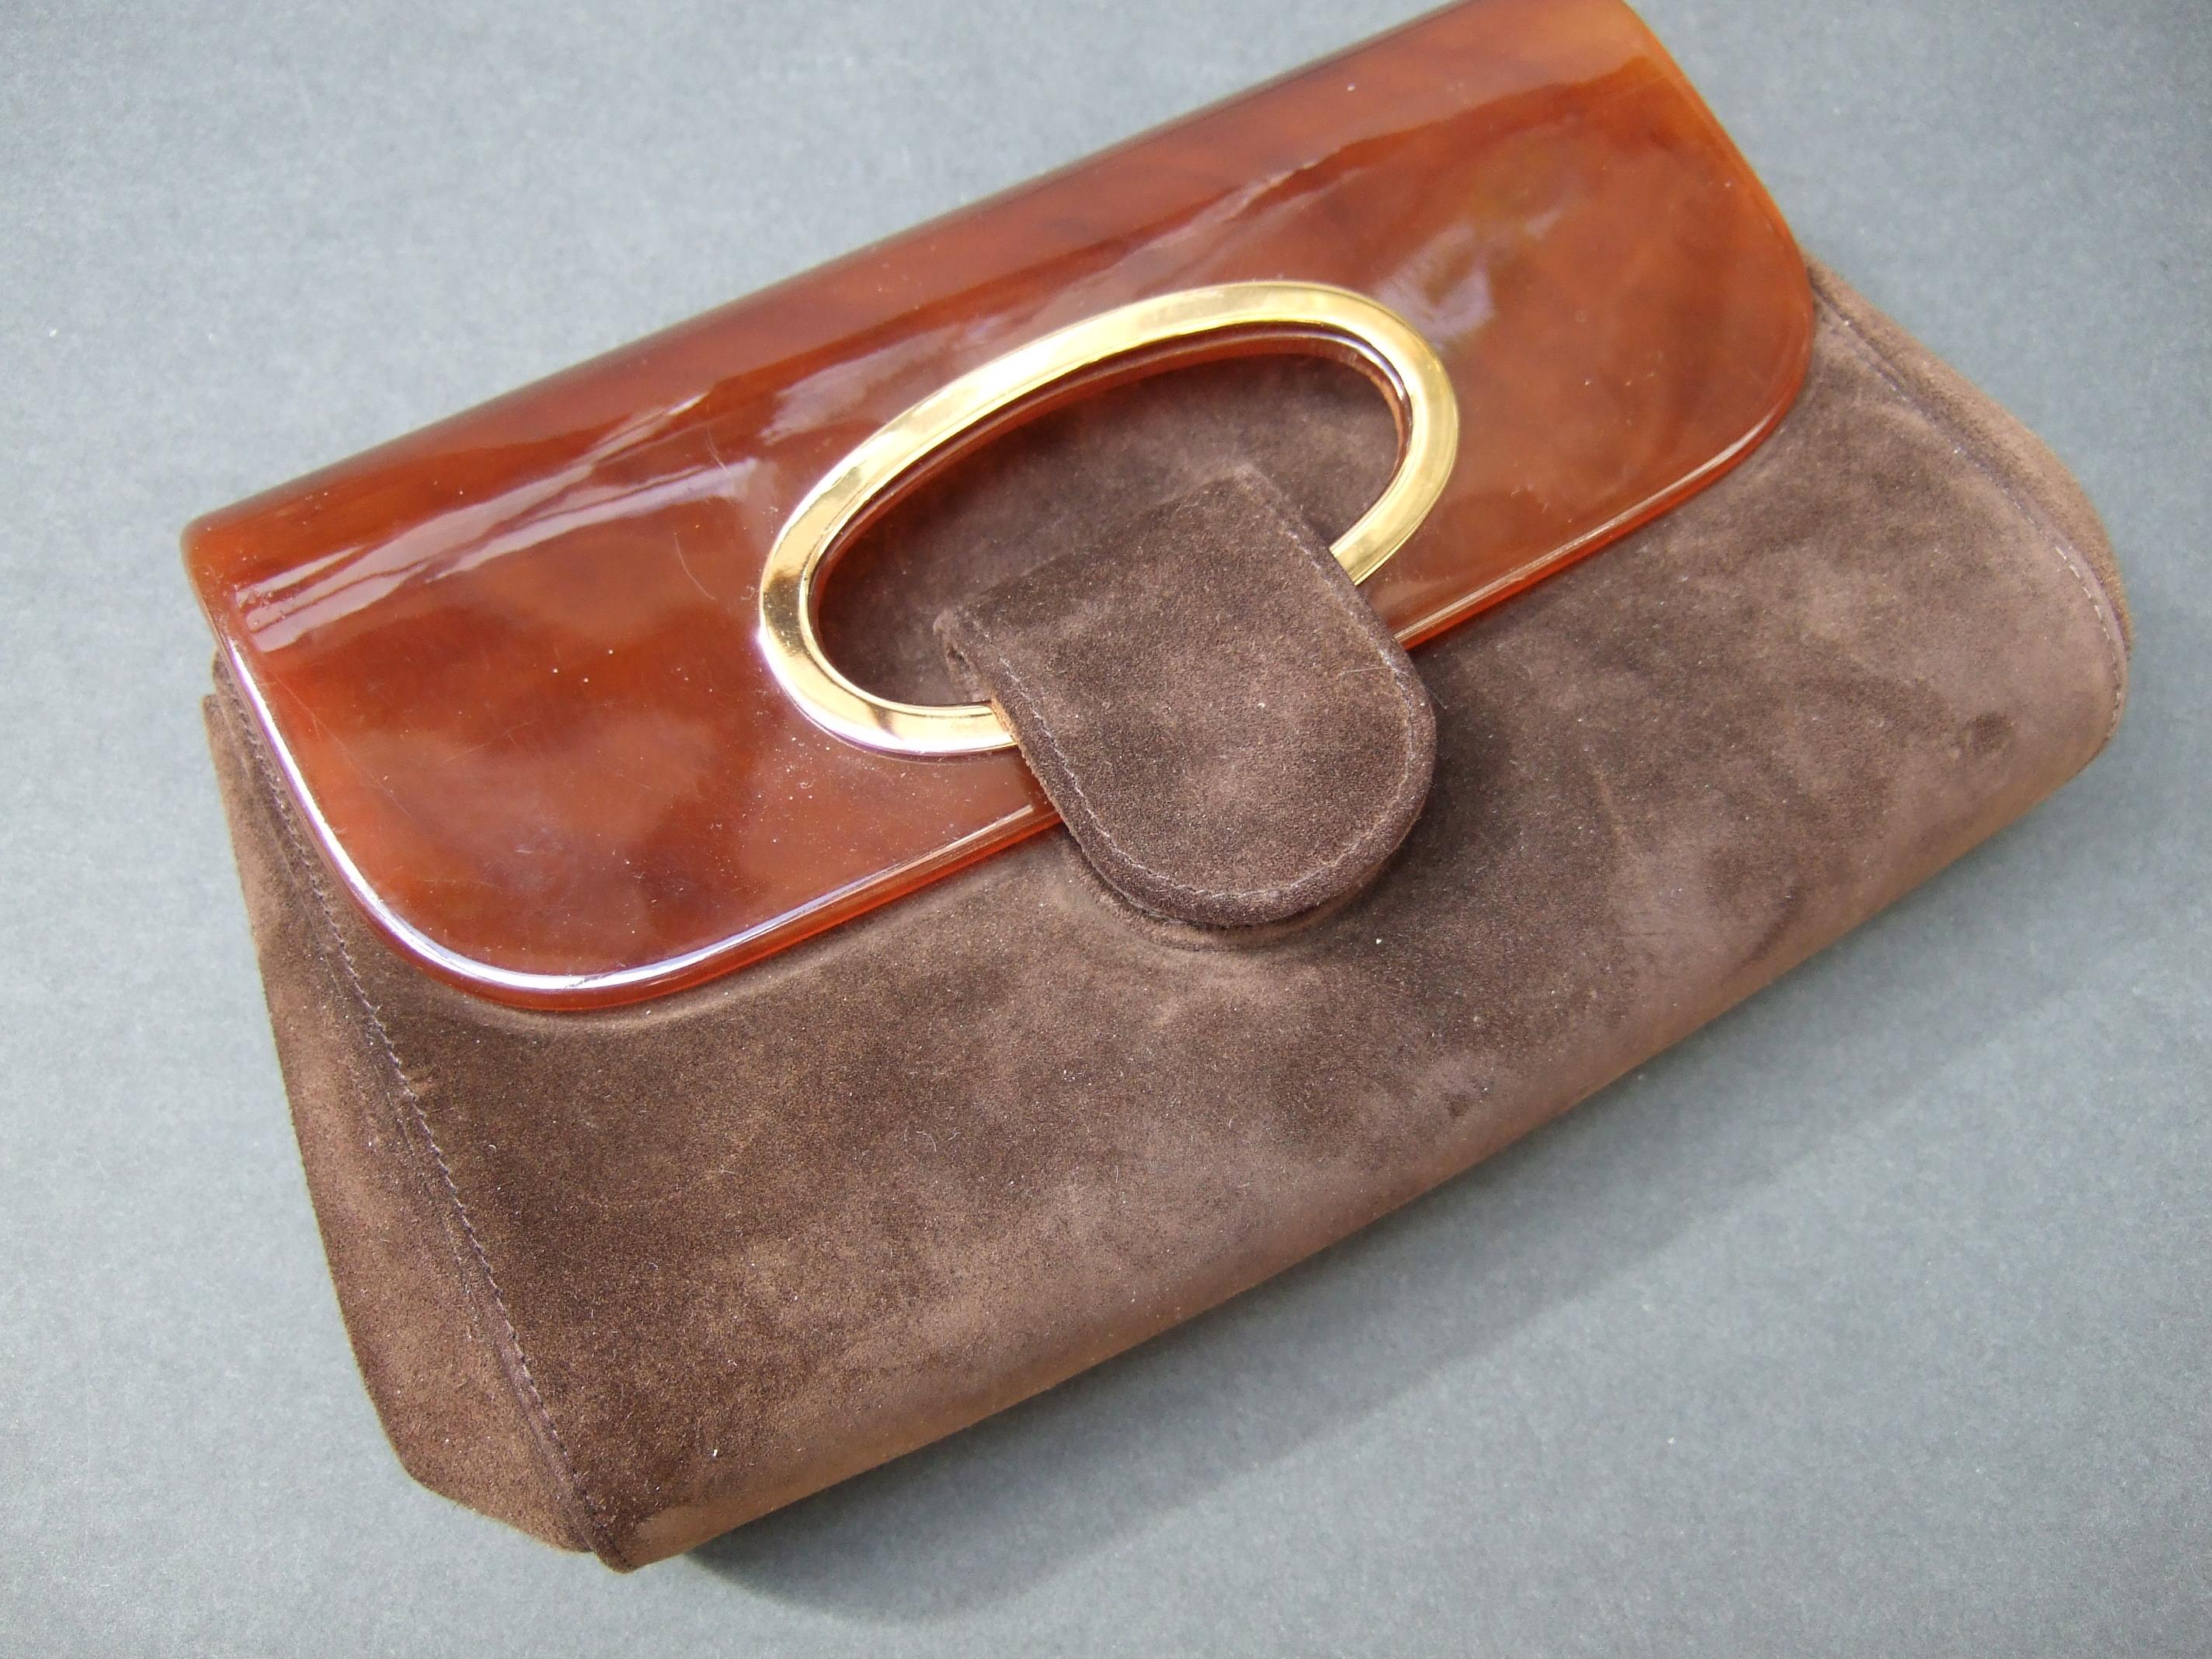 Gucci Italy Rare amber lucite brown suede clutch bag c 1970s
The unique Gucci clutch is designed with a sleek amber color lucite flap cover on the front exterior. The Italian clutch is covered with plush dark chocolate brown suede

The suede covered